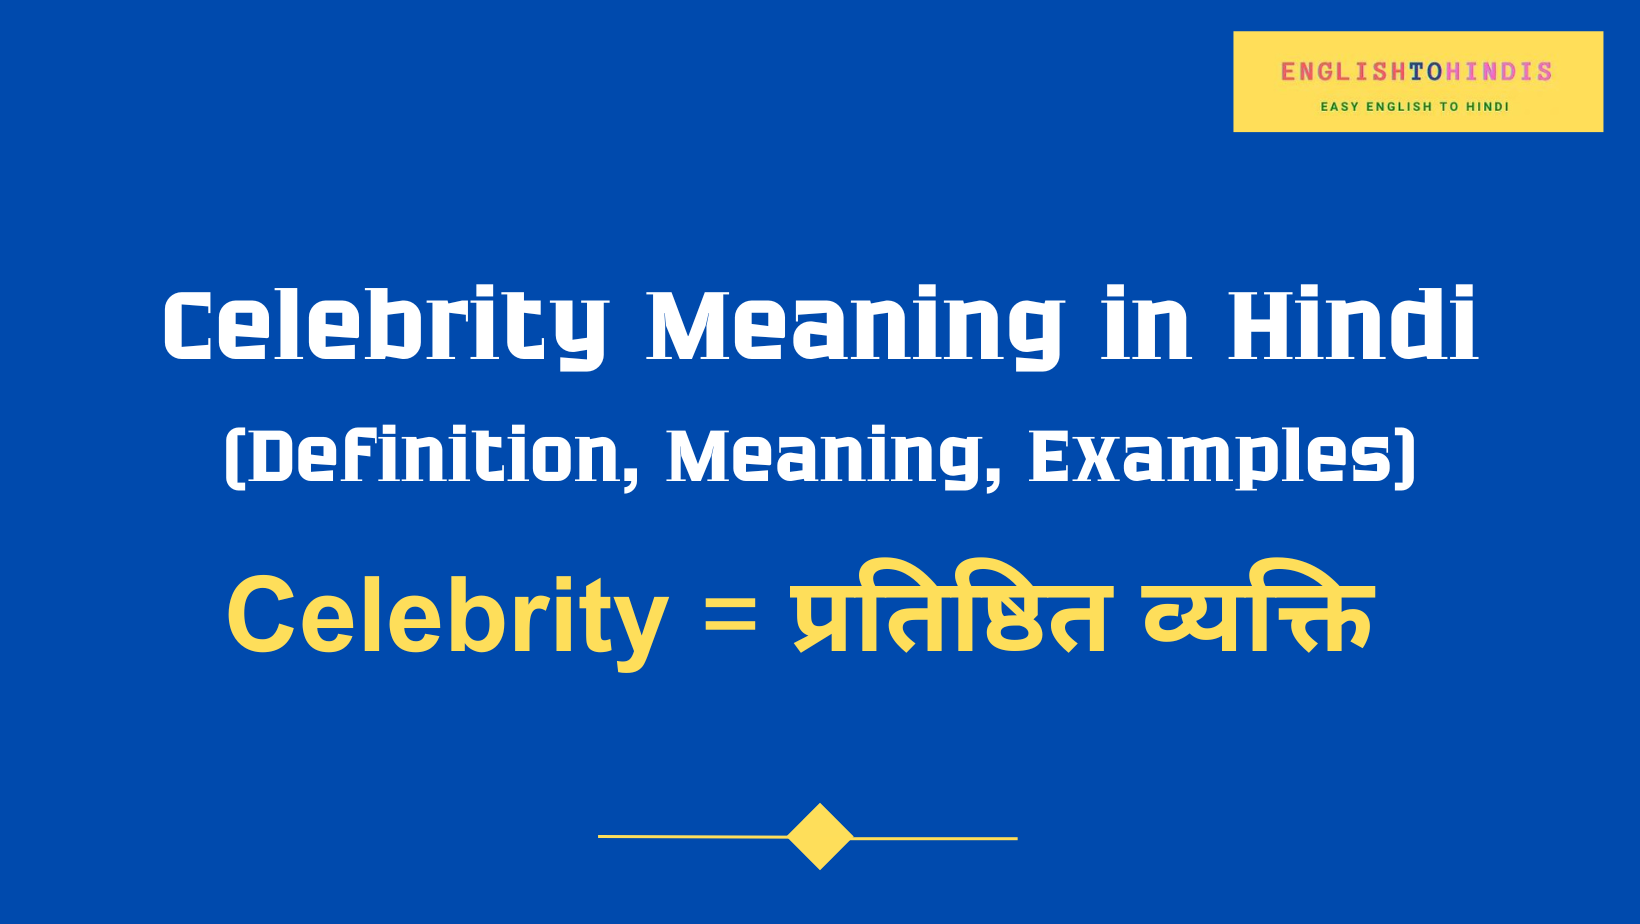 Celebrity meaning in Hindi